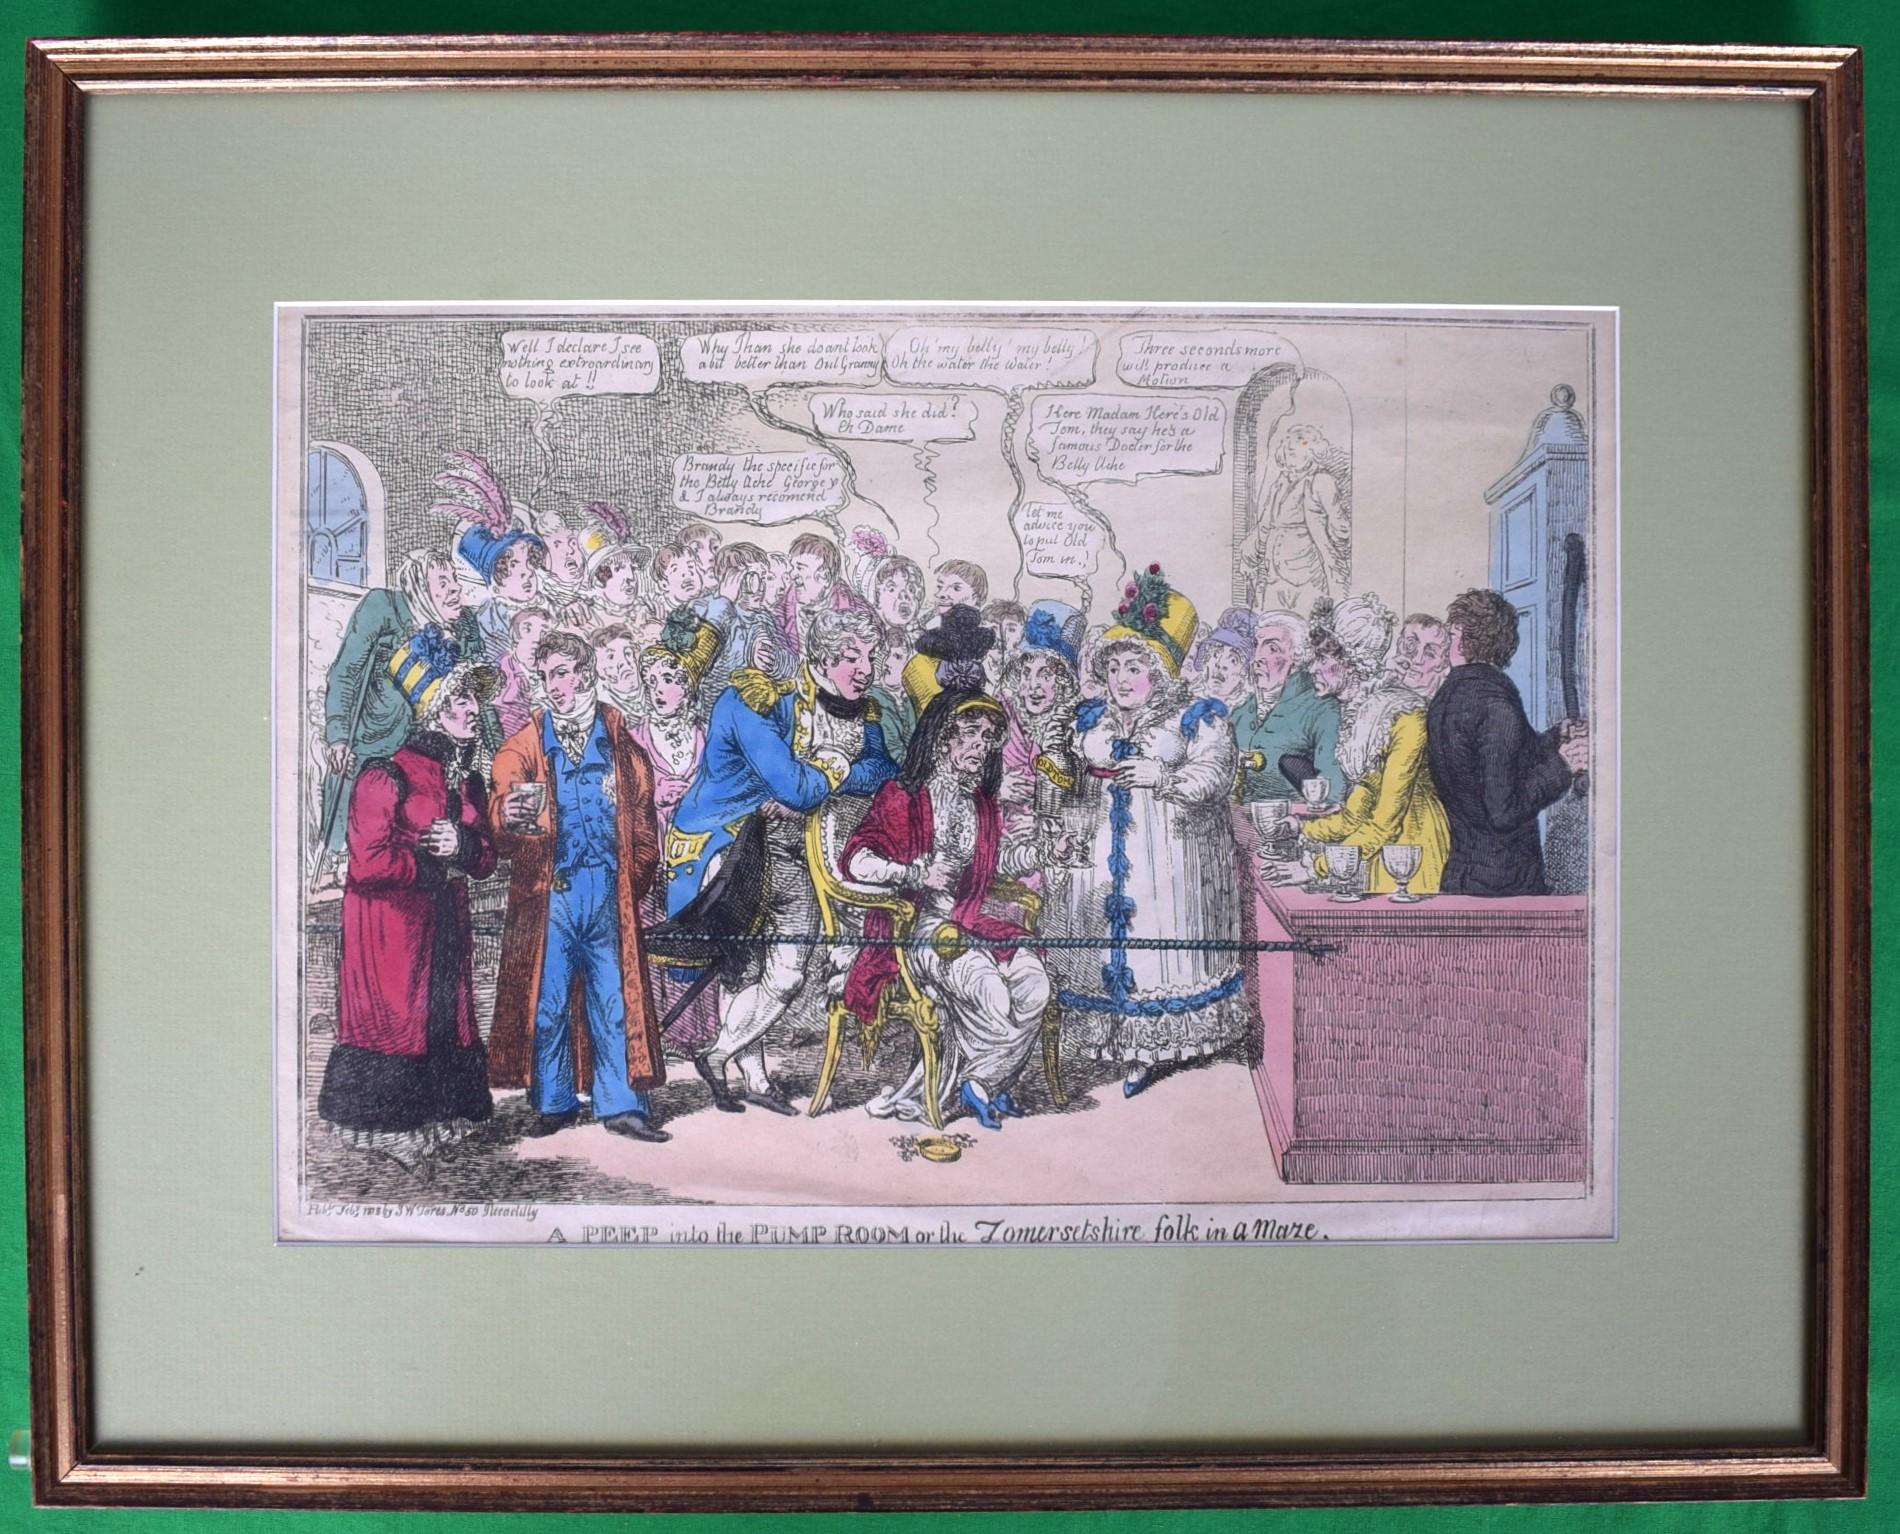 "A Peep Into The Pump Room Or The Zomersetshire Folk In A Maze" 1818 - Print by Fores, S. W.